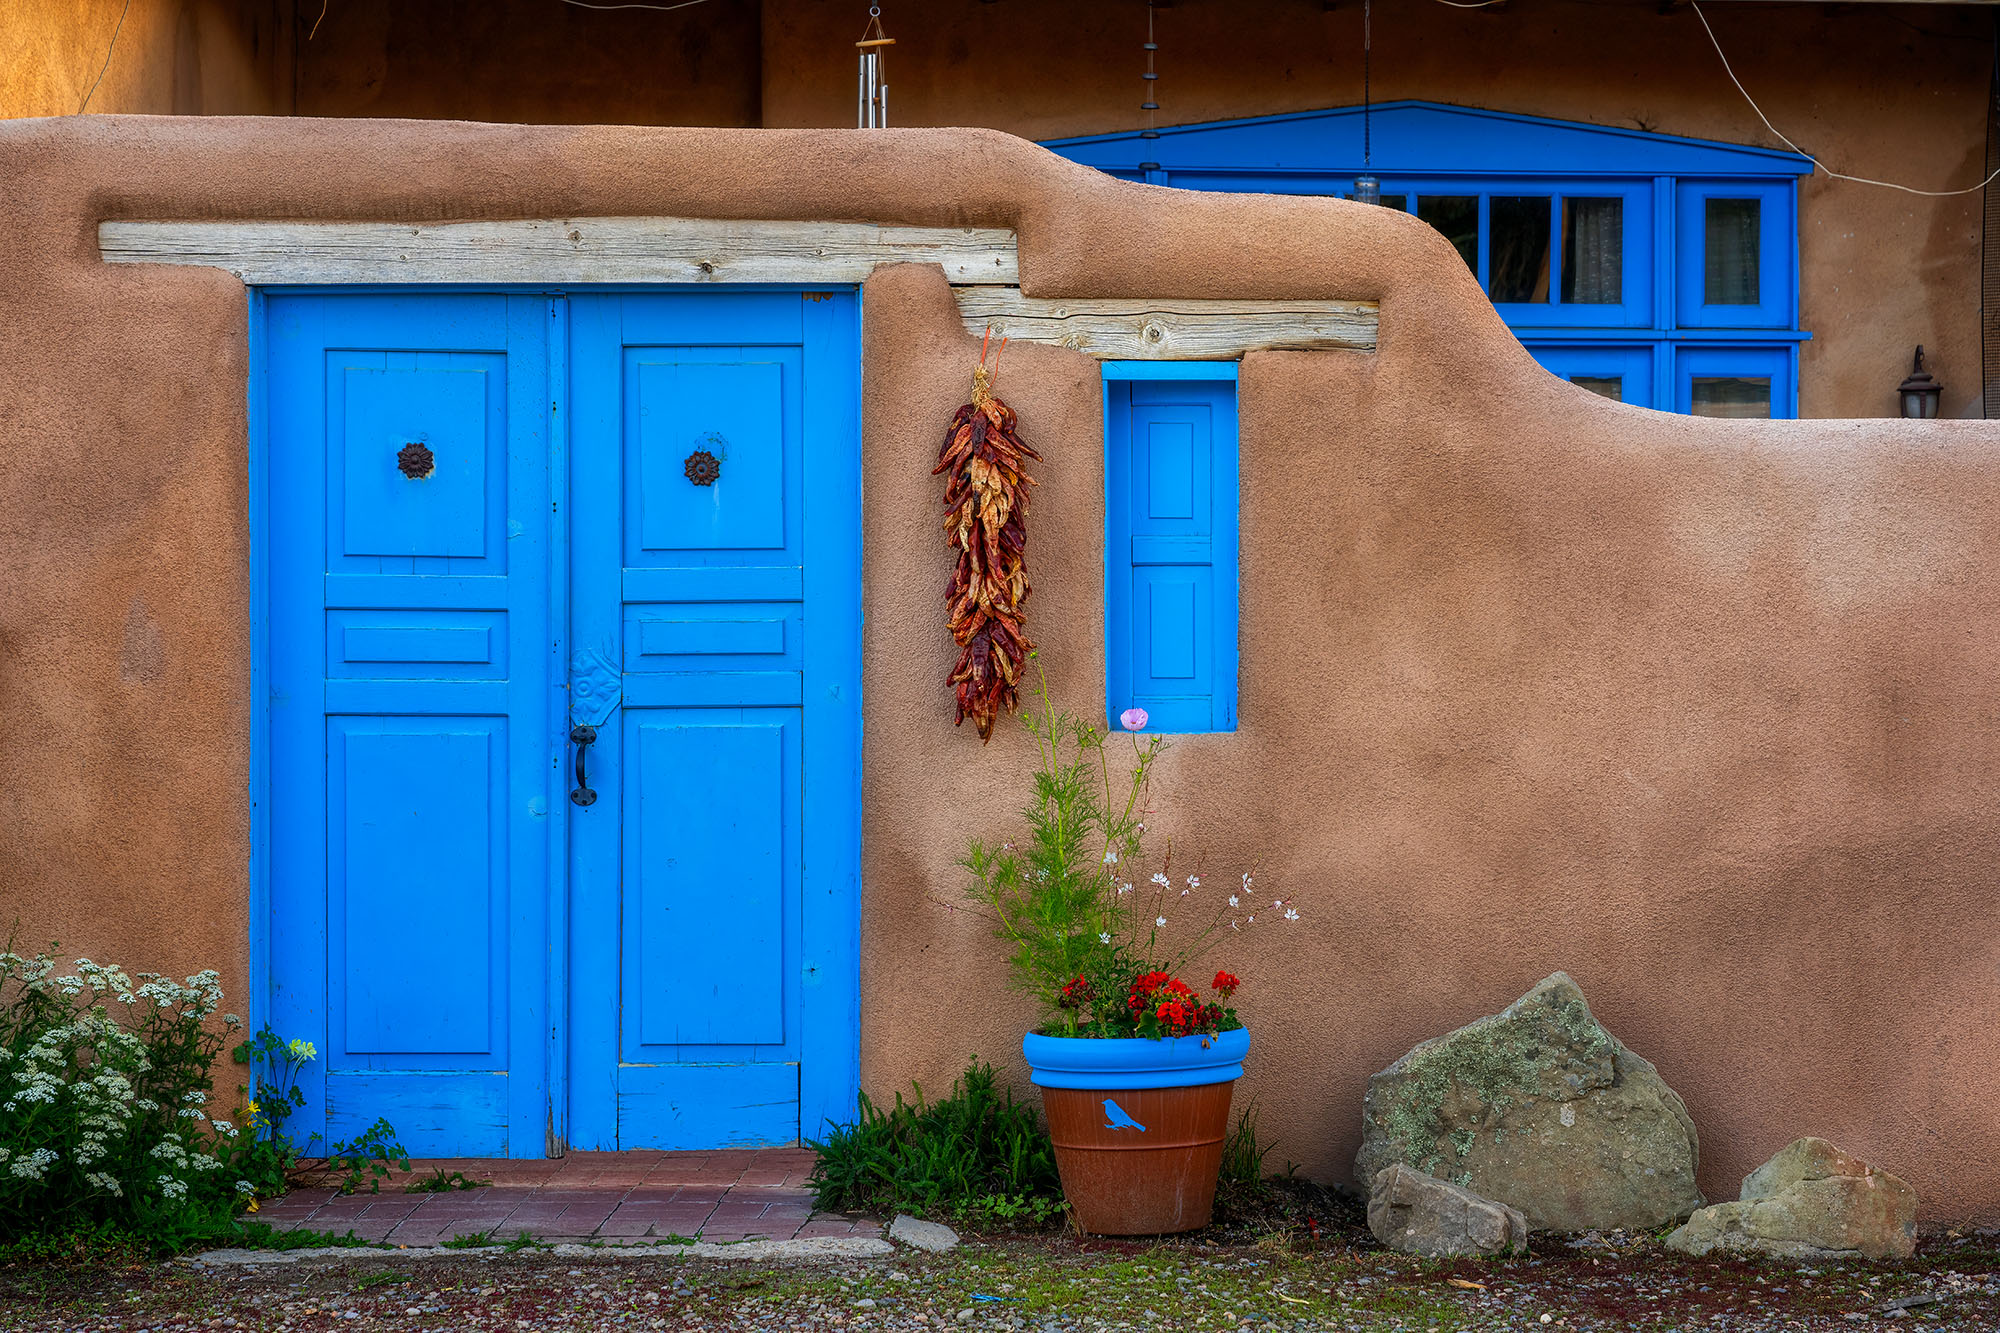 Nestled in the heart of Taos, New Mexico, "Adobe Blues" offers a glimpse into the traditional architecture of the region. A classic...